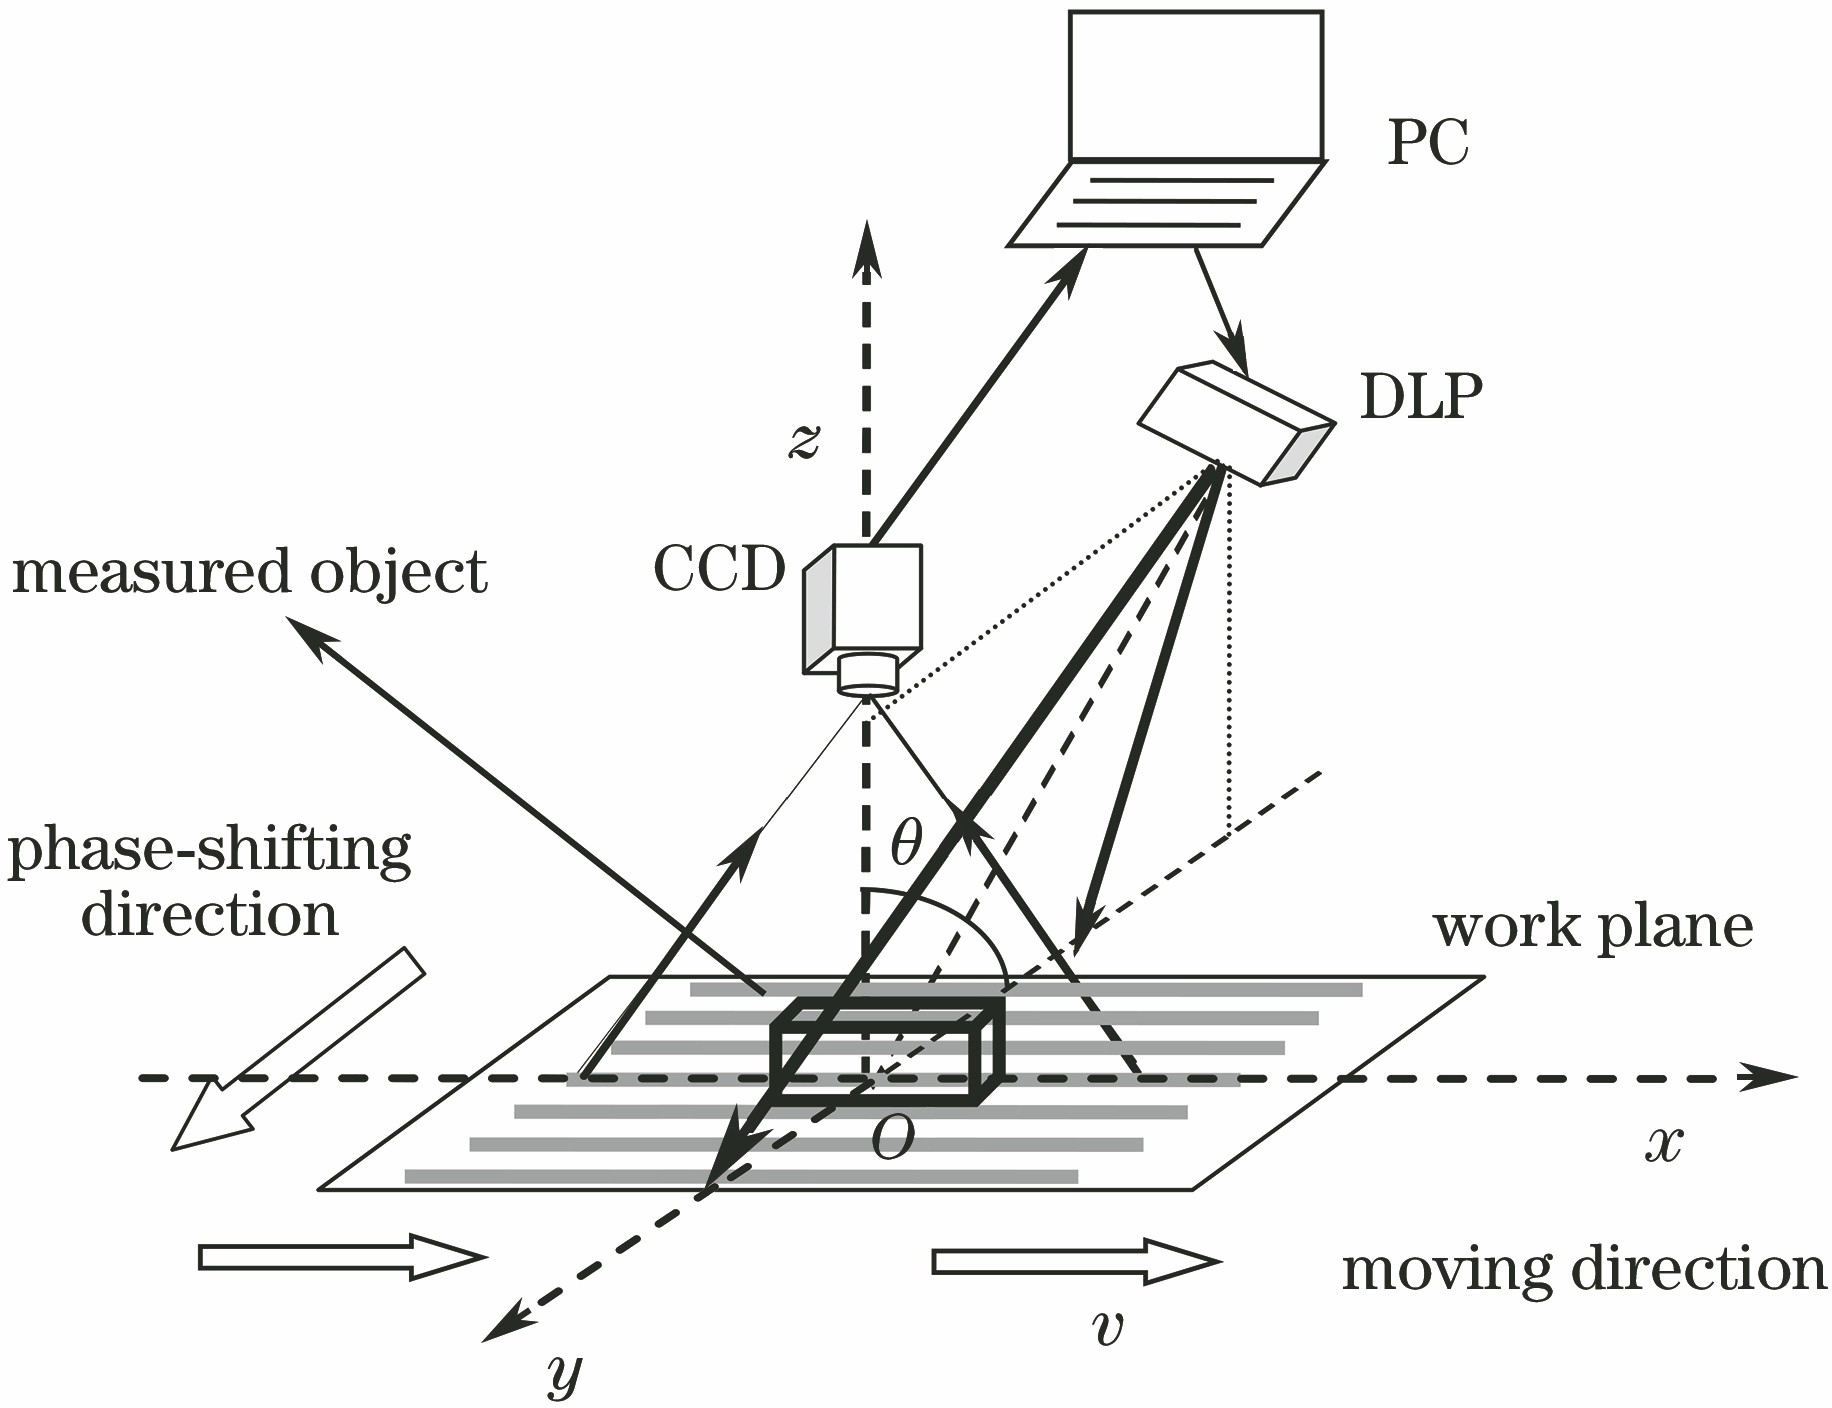 On-line 3D measurement system based on full-cycle equal phase-shift algorithm